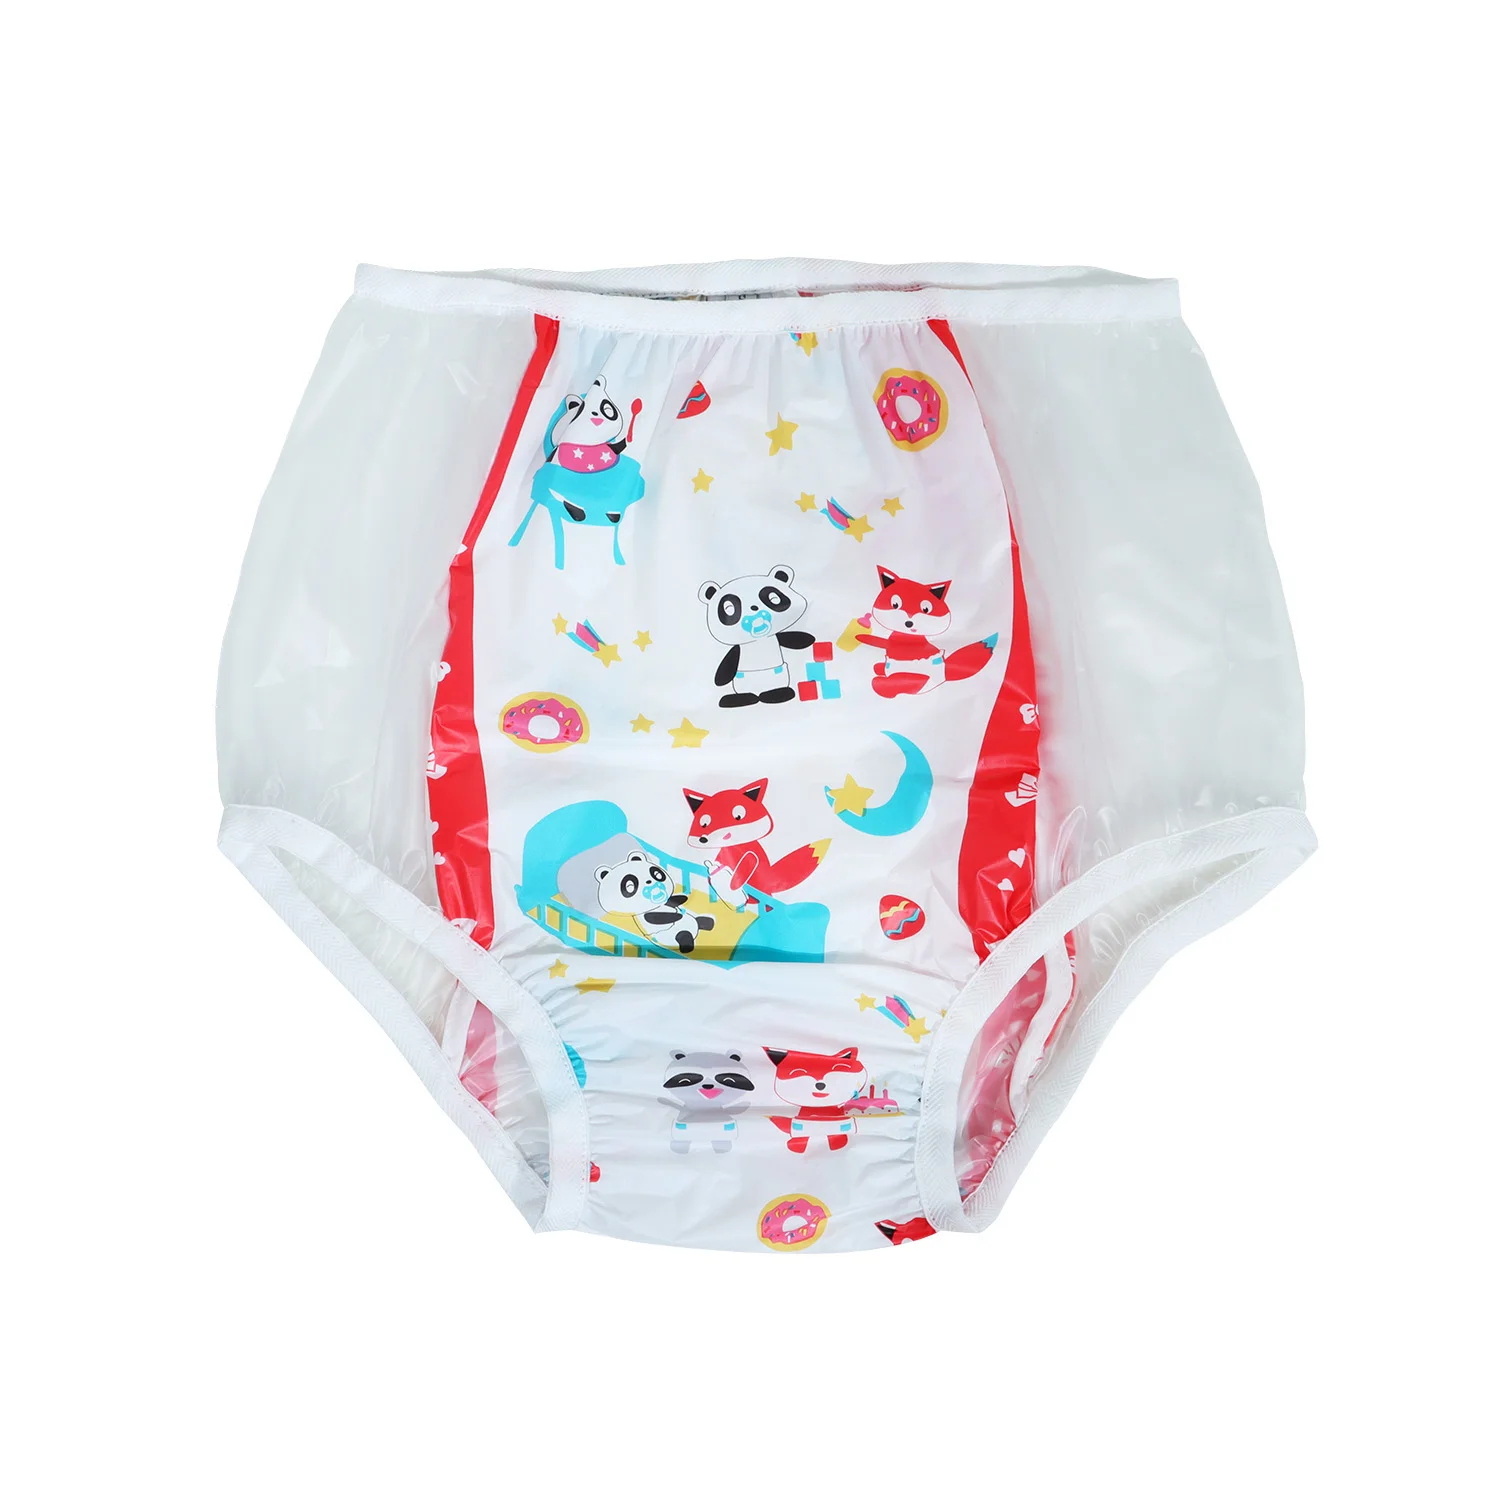 abdl adult baby diapers pvc reusable diaper full printed pattern Babies diapers panties onesize ddlg bebe Baby washable diaper images - 6